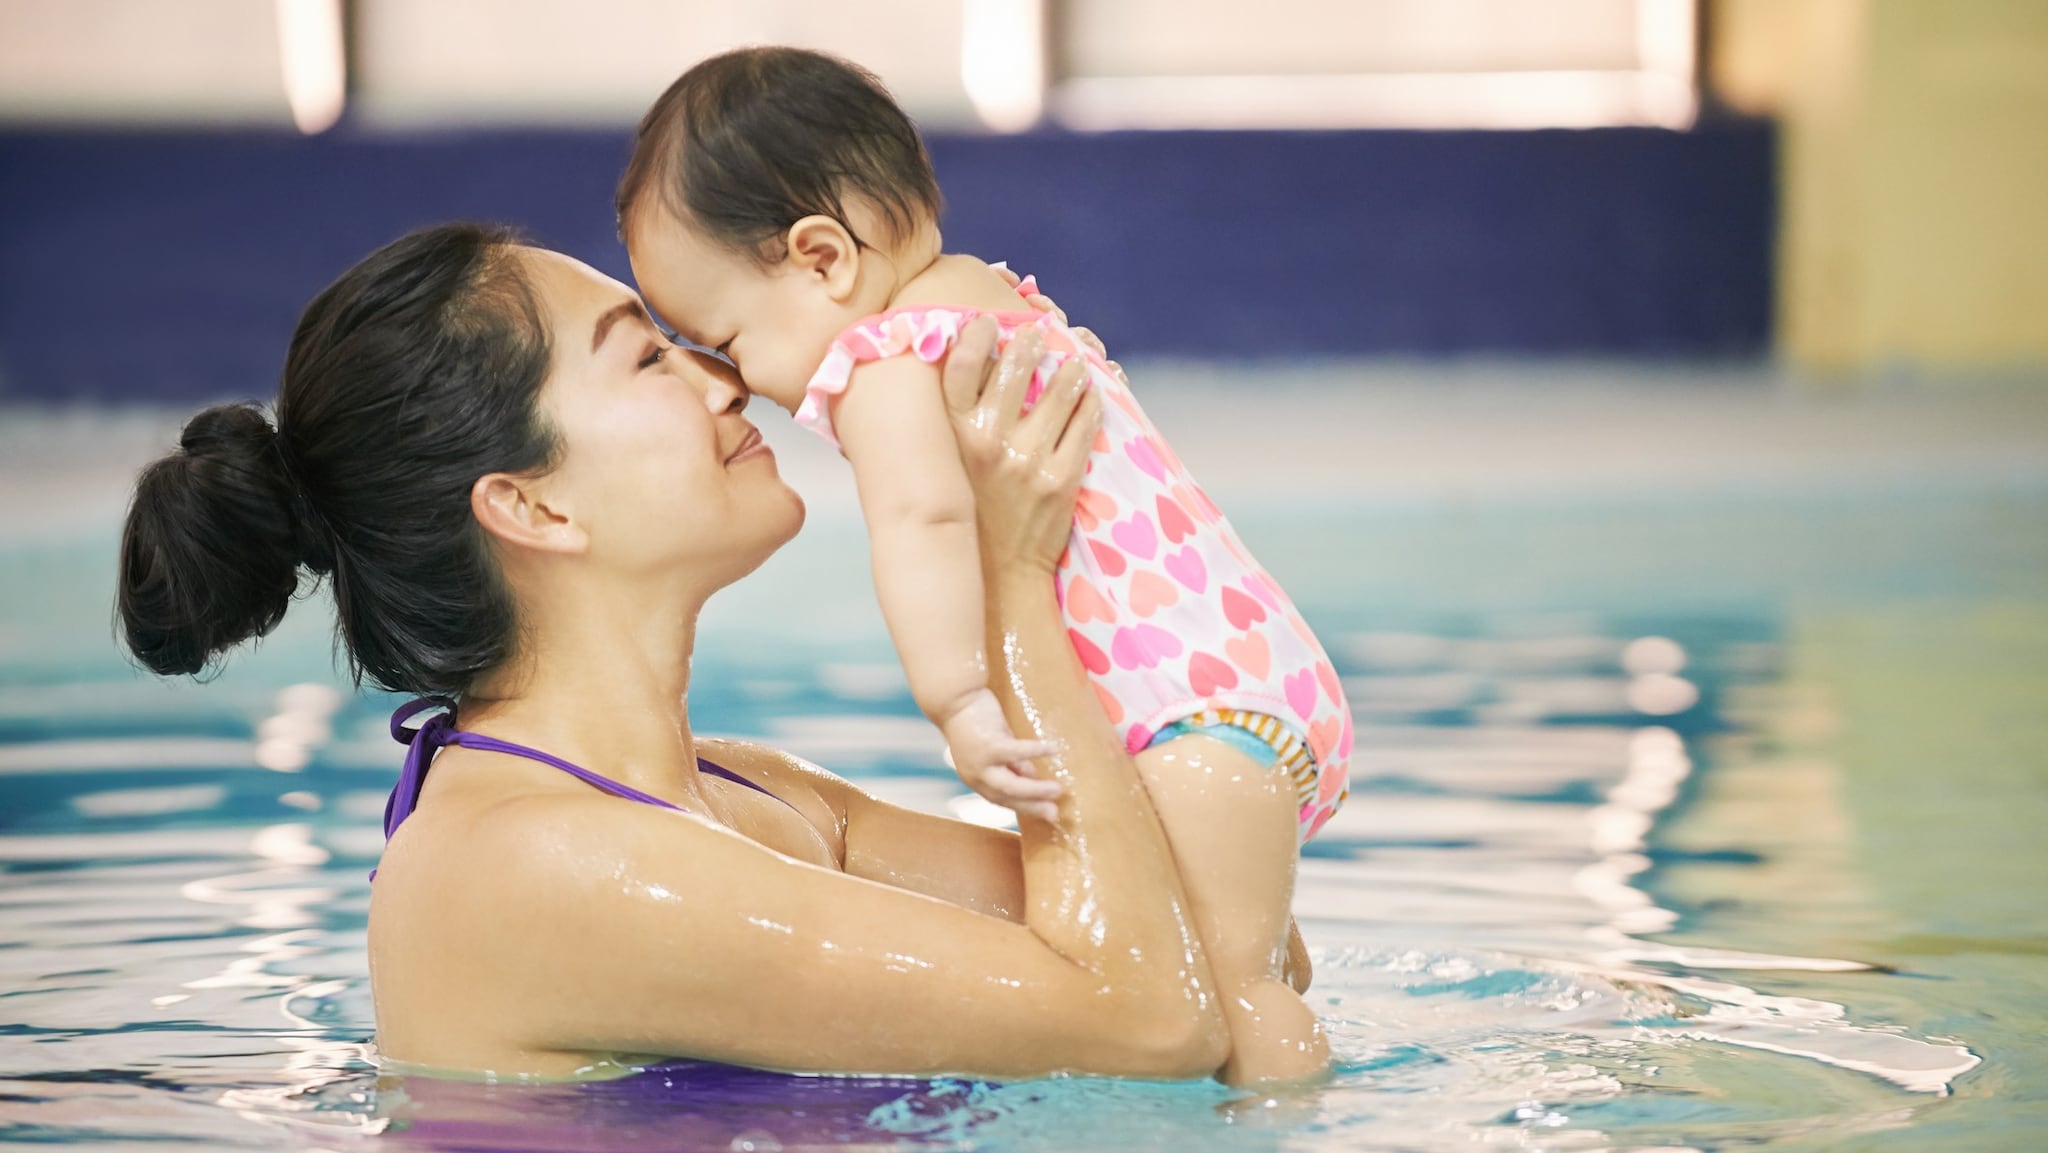 Mother in swimming pool holding baby that is wearing a swim diaper.